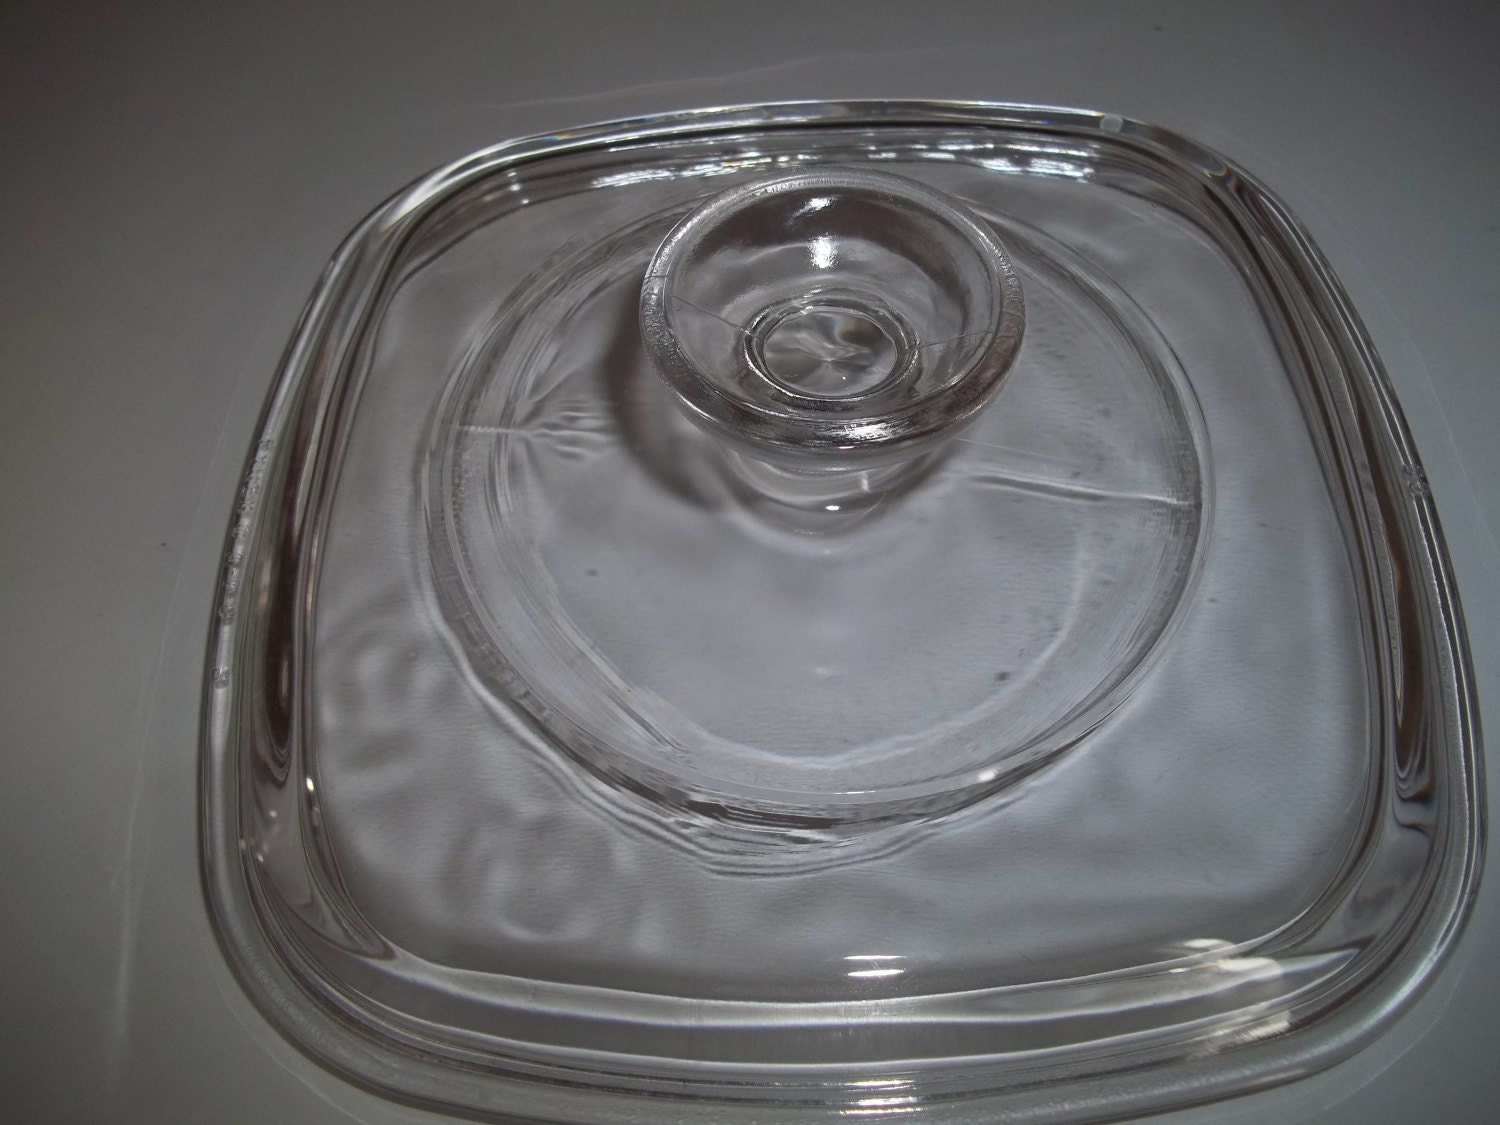 Pyrex Large Knob Lid fits Corning Ware 1 1 1/2 or 1 3/4